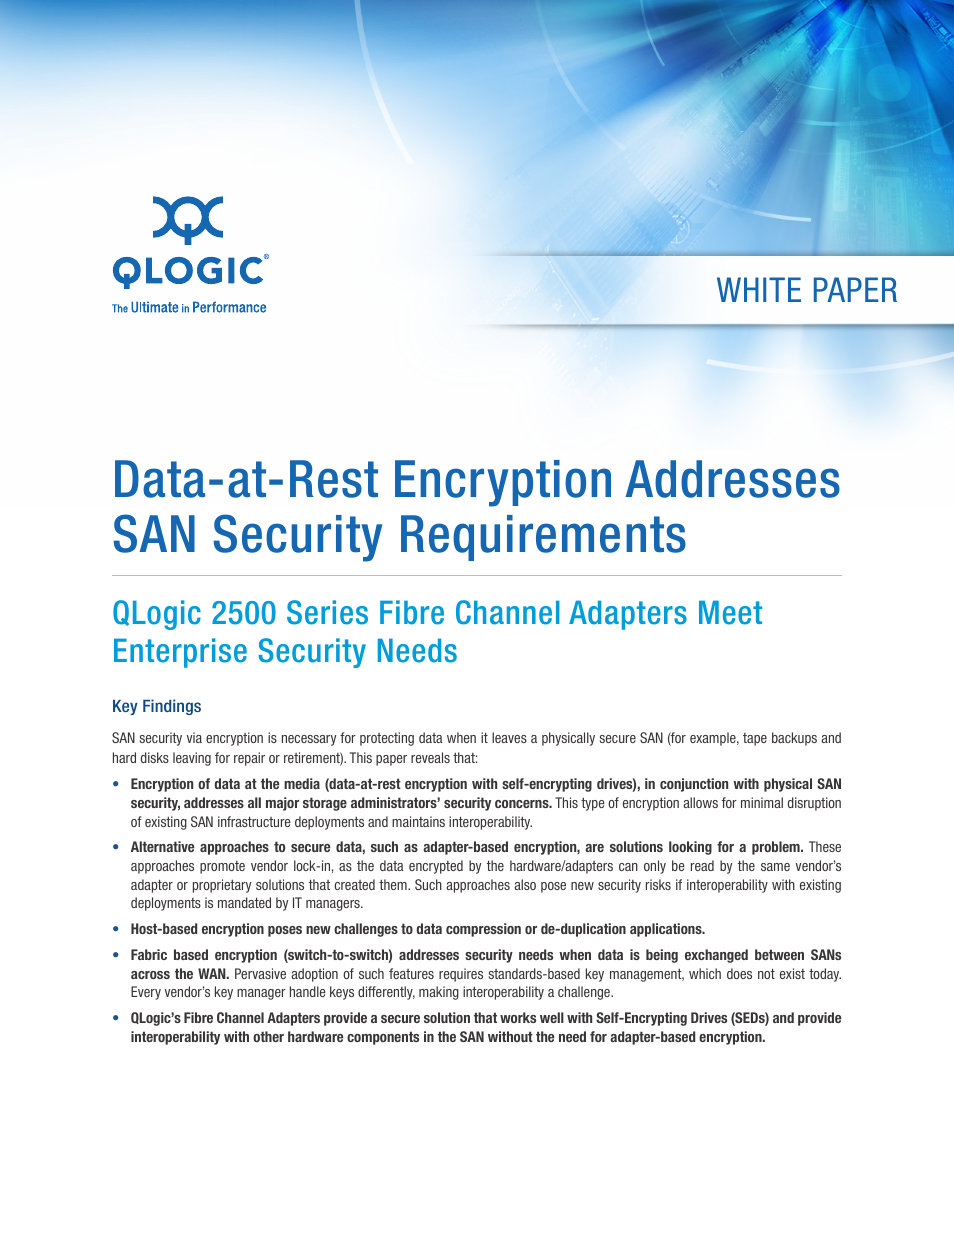 2500 Series Data-at-Rest Encryption Addresses SAN Security Requirements